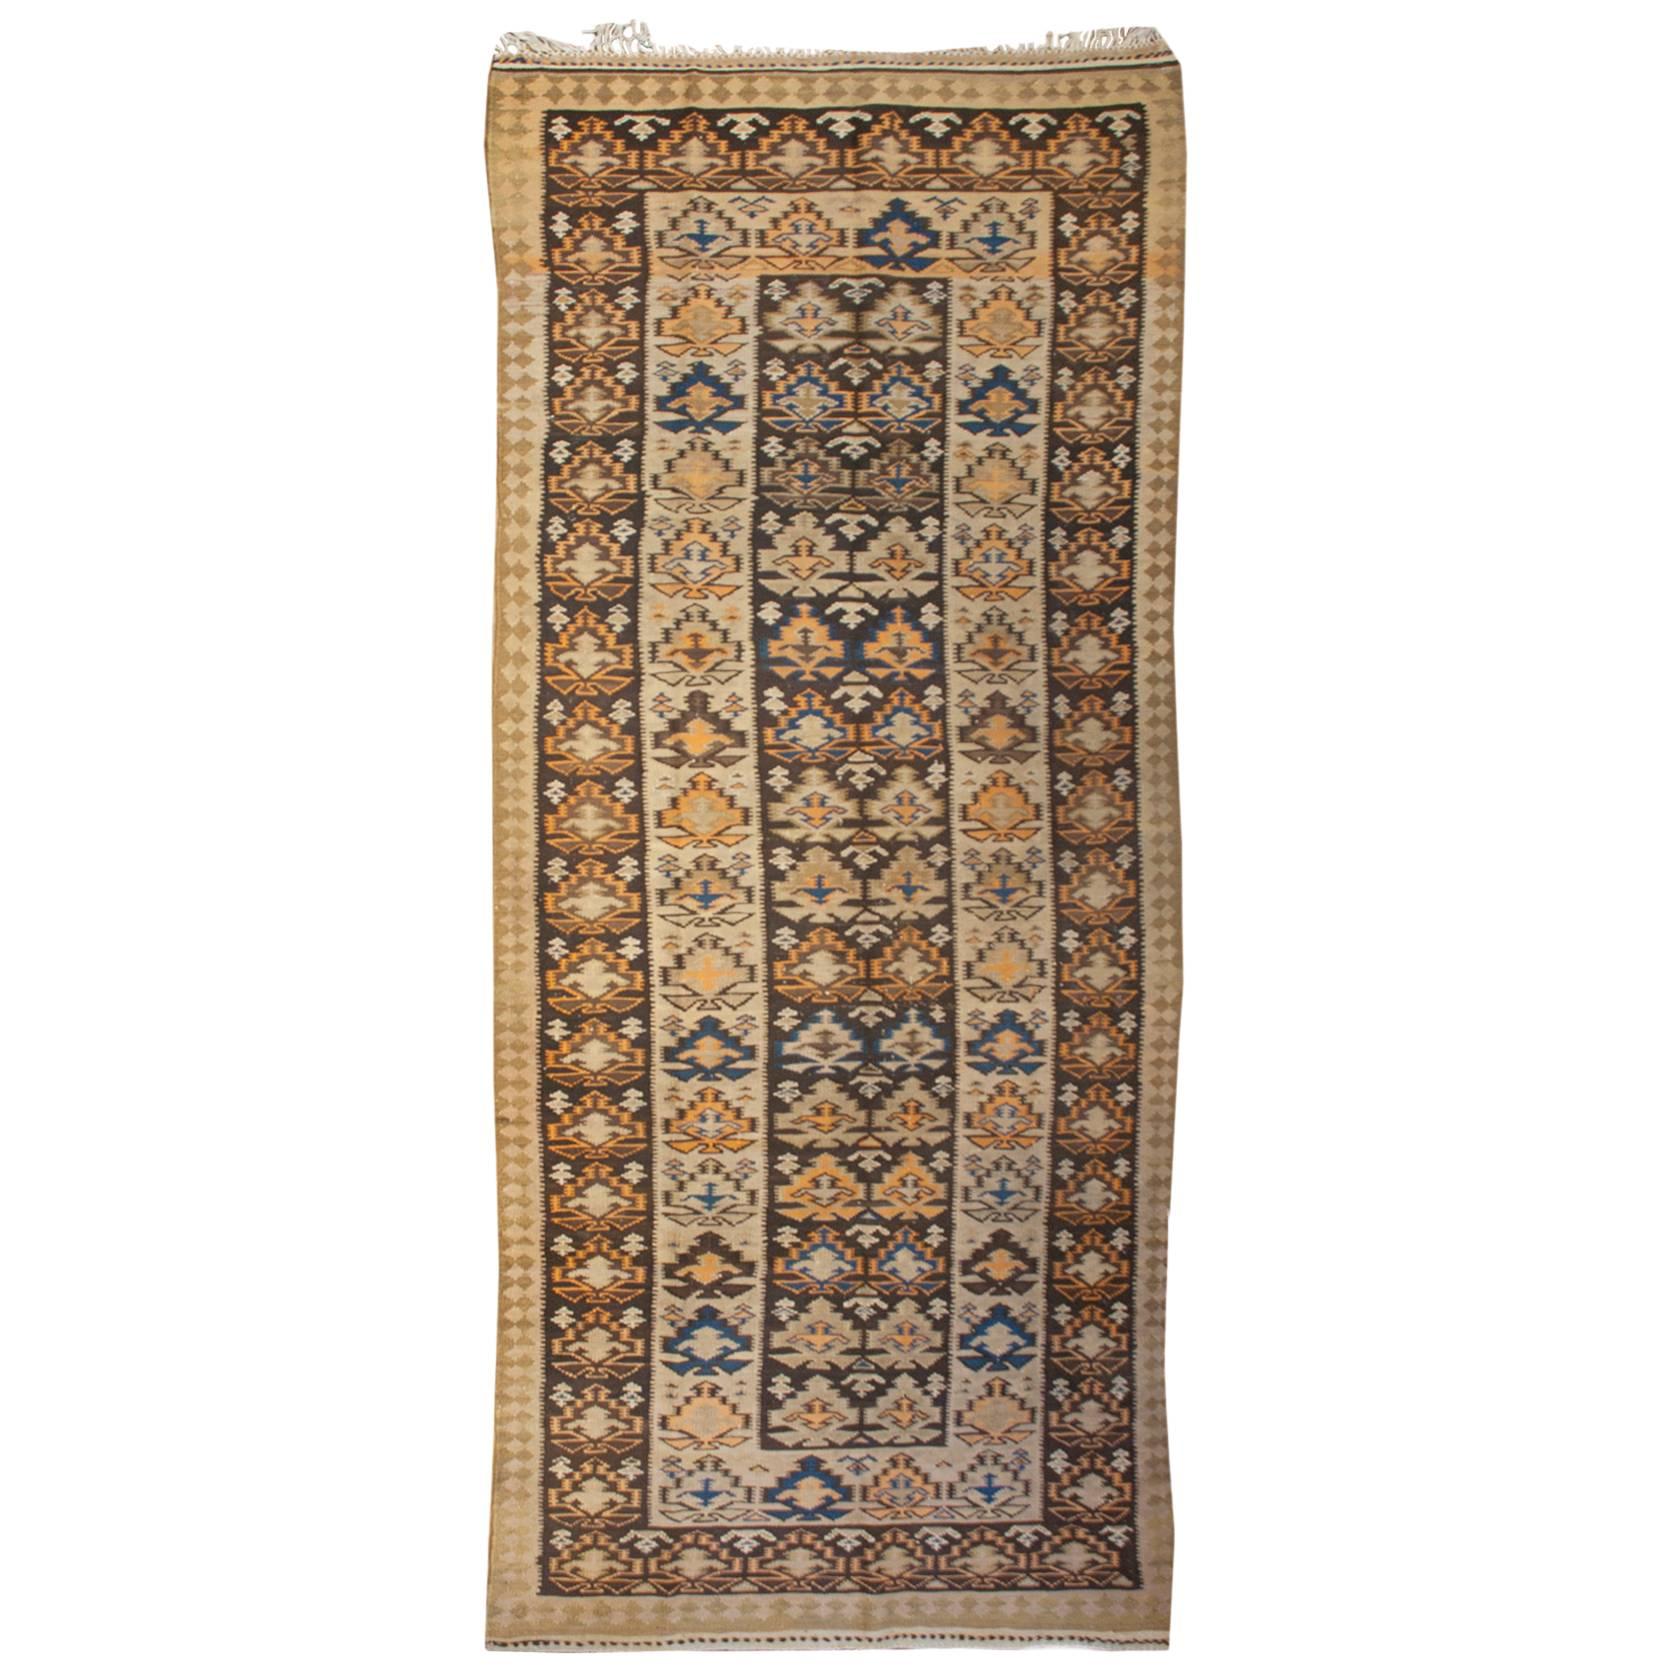 Early 20th Century Qazvin Kilim Runner For Sale